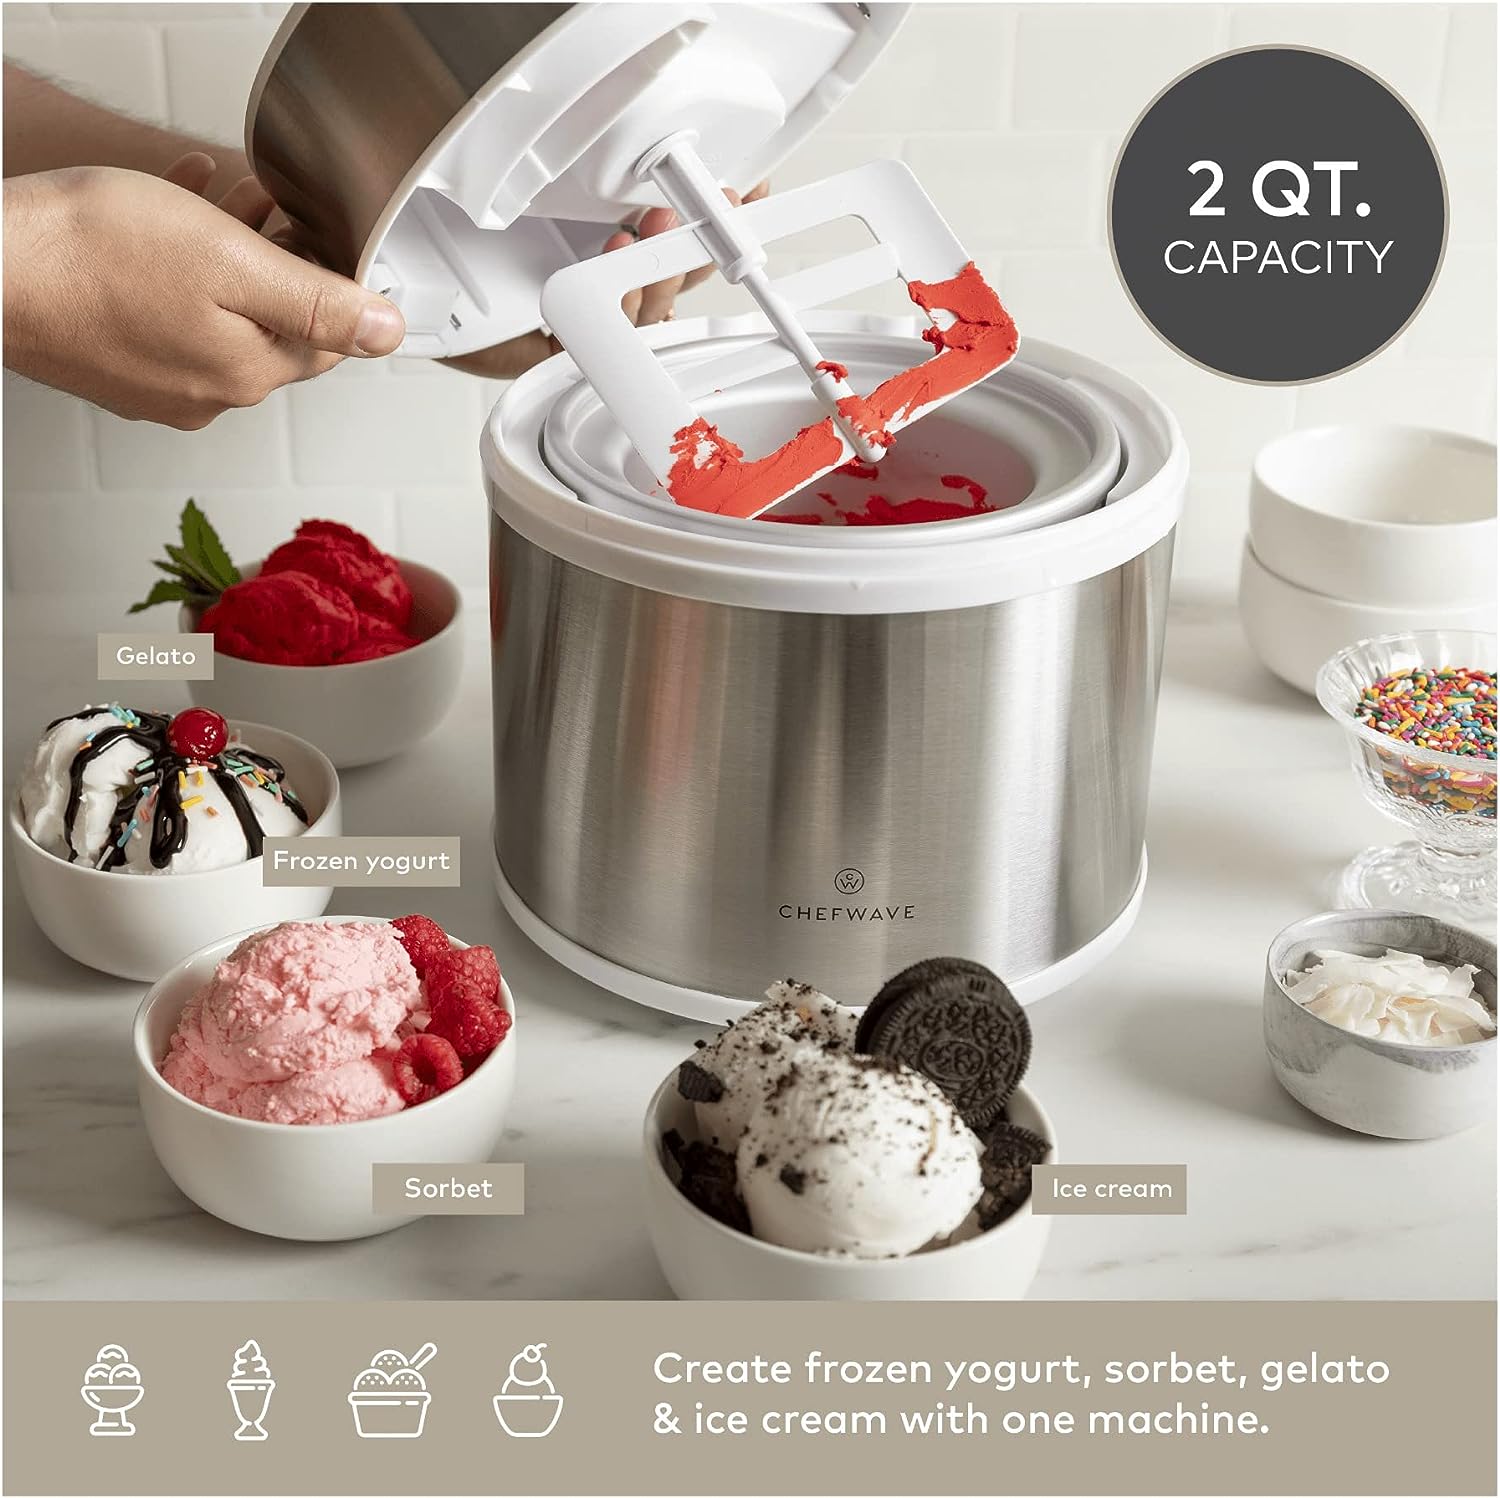 ChefWave Elado 2 Qt Automatic Frozen Yogurt, Sorbet, Gelato, Ice Cream Maker Includes 2 Pack Reusable Freezer Storage Containers 1 Qt Capacity, Recipe Book, LCD Digital Display, Adjustable Churn Time